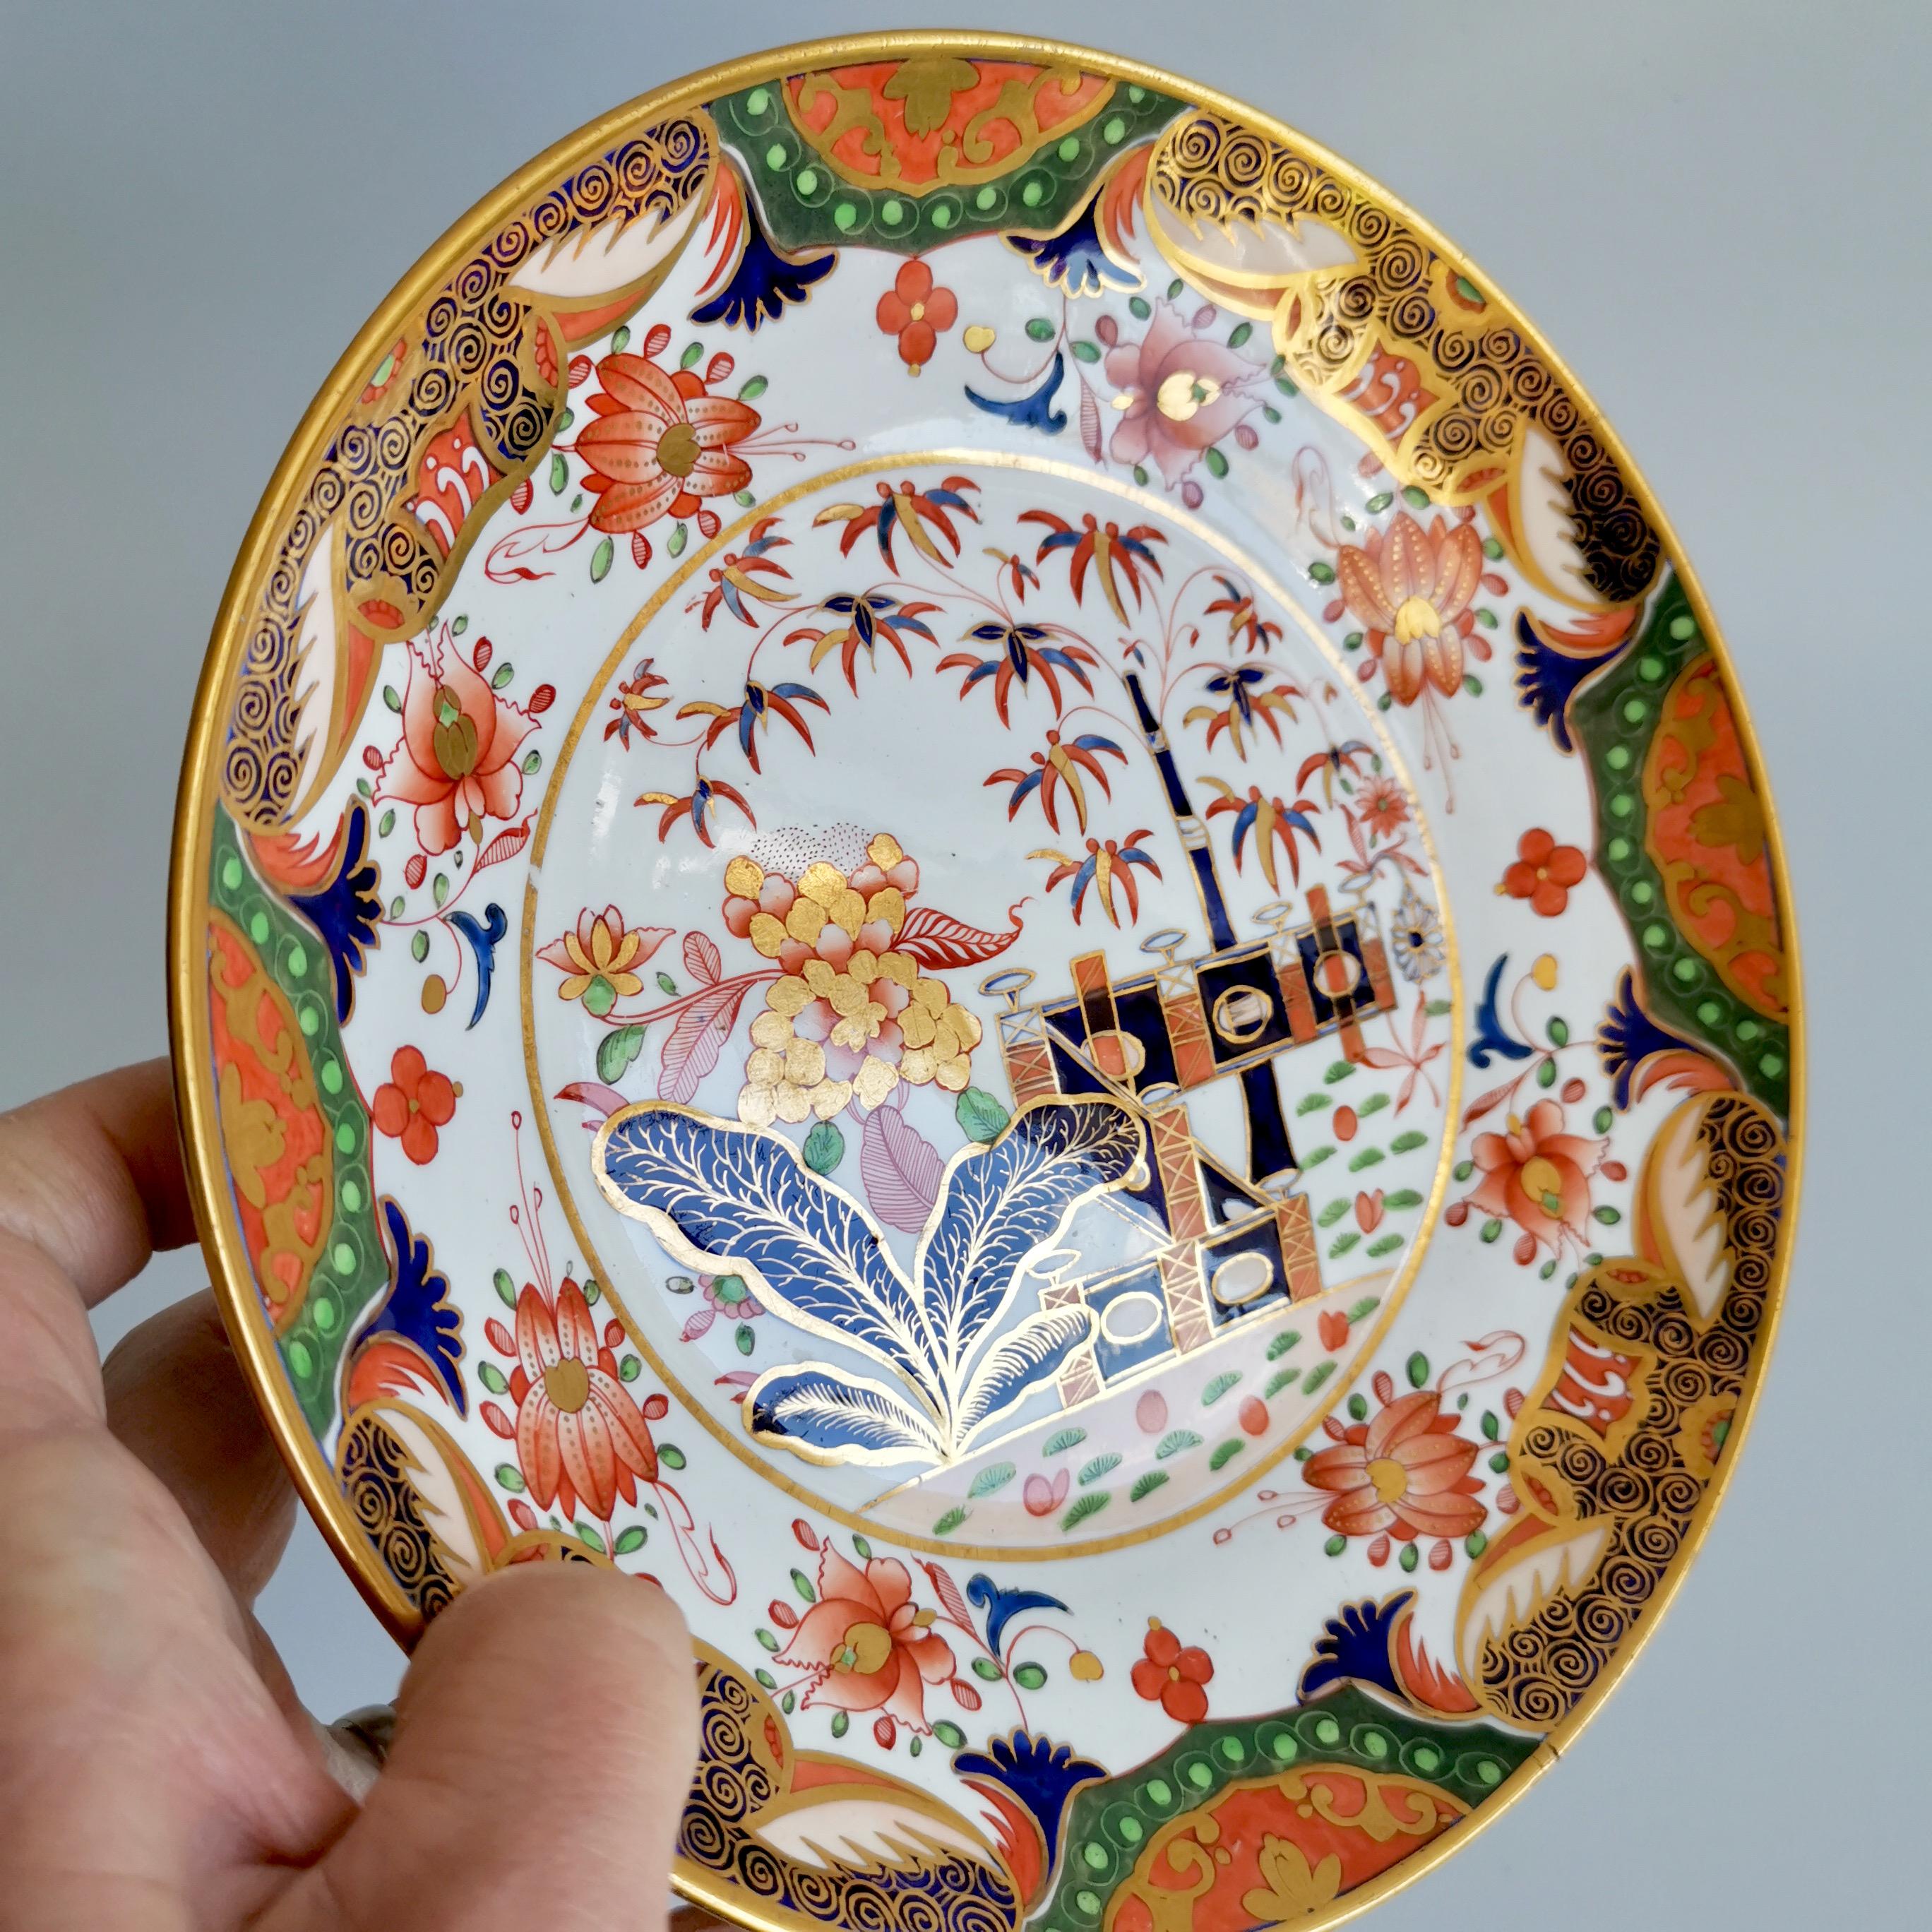 This is a beautiful saucer dish or plate made by Spode around 1815. The plate is decorated in the famous Imari Tobacco Leaf pattern 967. A saucer dish is a deep plate that formed part of a large tea service; it was useful for serving cakes or fruit,